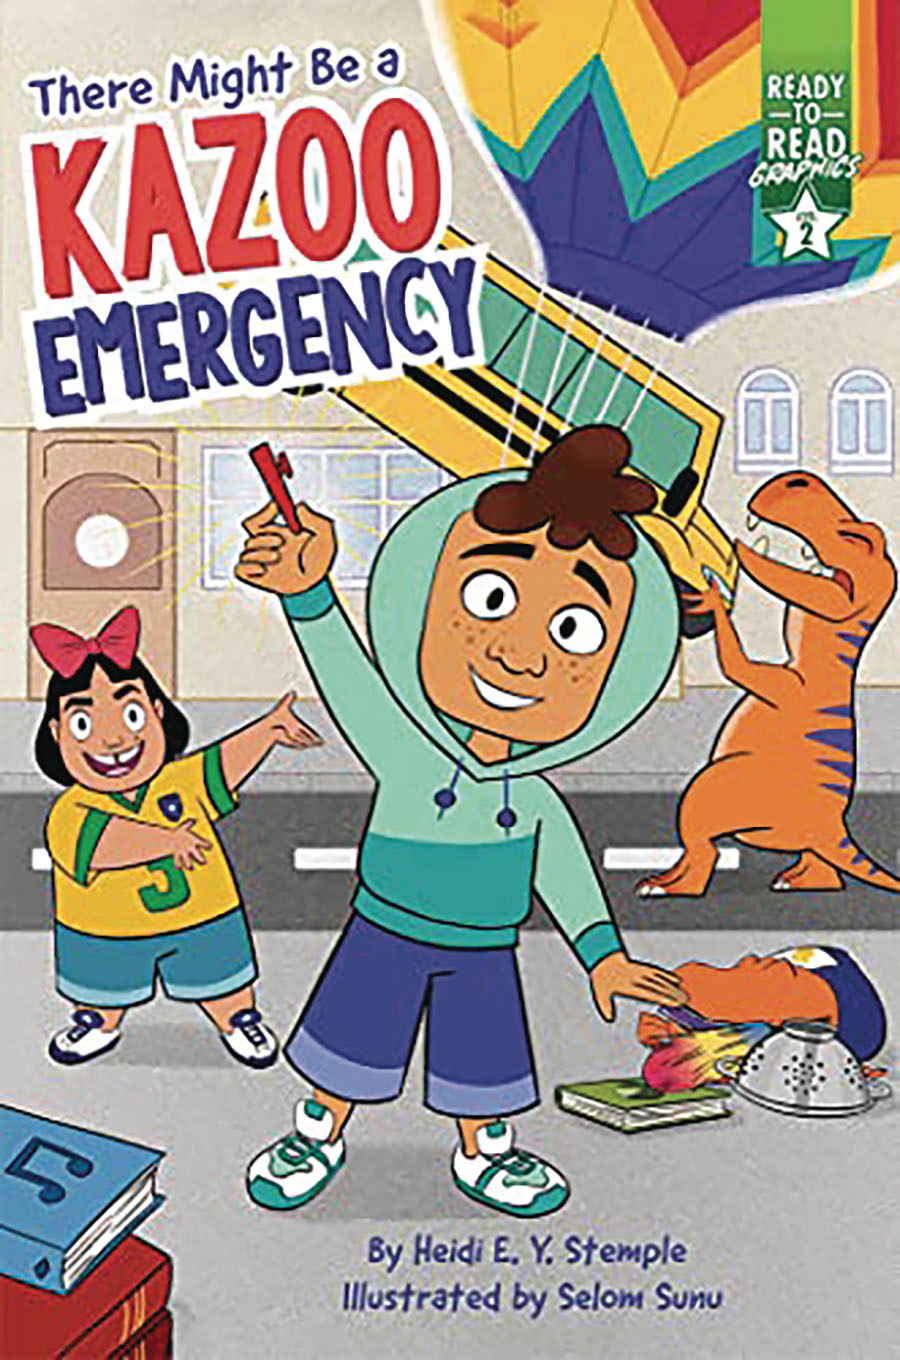 There Might Be A Kazoo Emergency A Ready-To-Read Graphic Novel TP